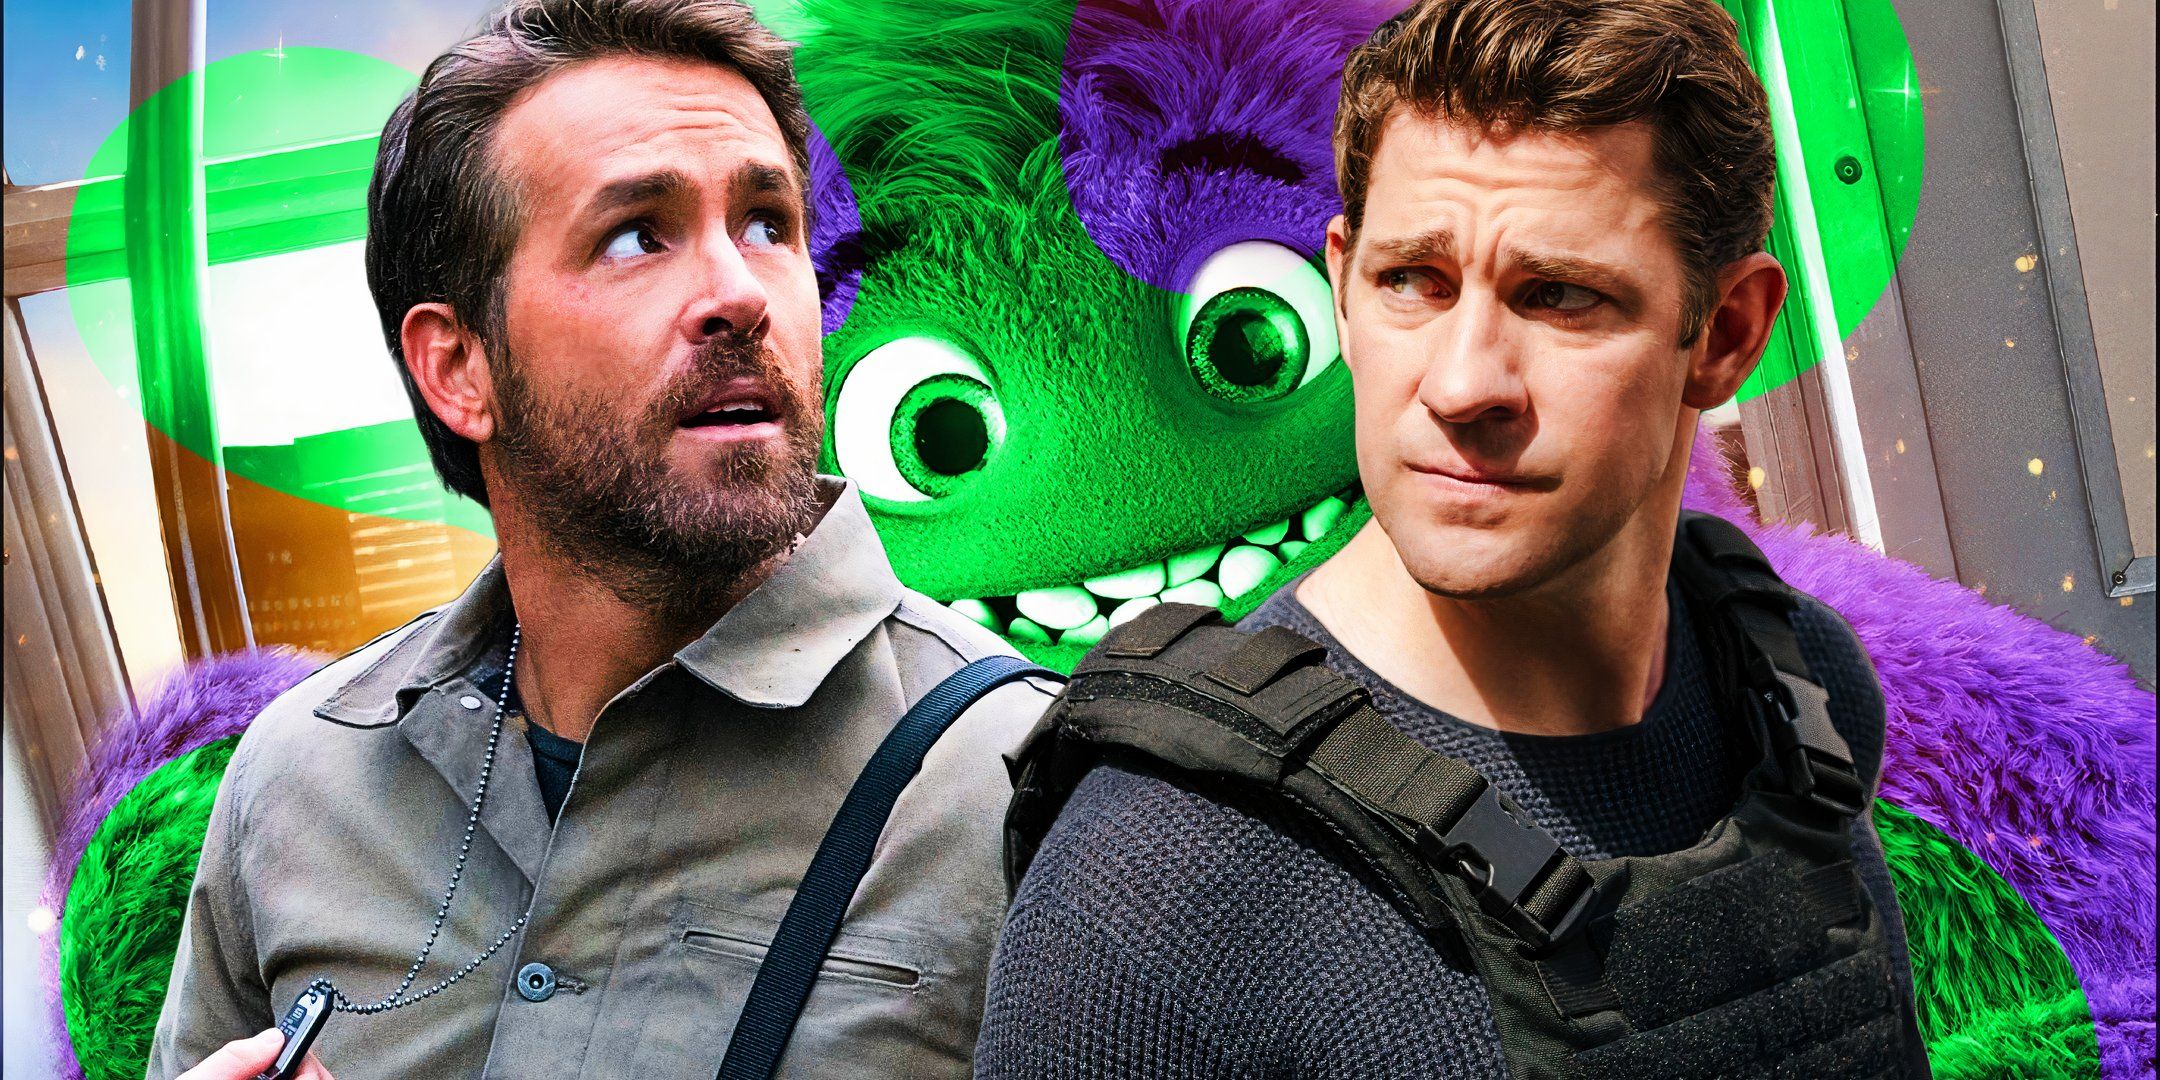 Ryan Reynolds in Adam Project and John Krasinski in Jack Ryan and Blue from IF with Rotten Tomatoes rotten logo